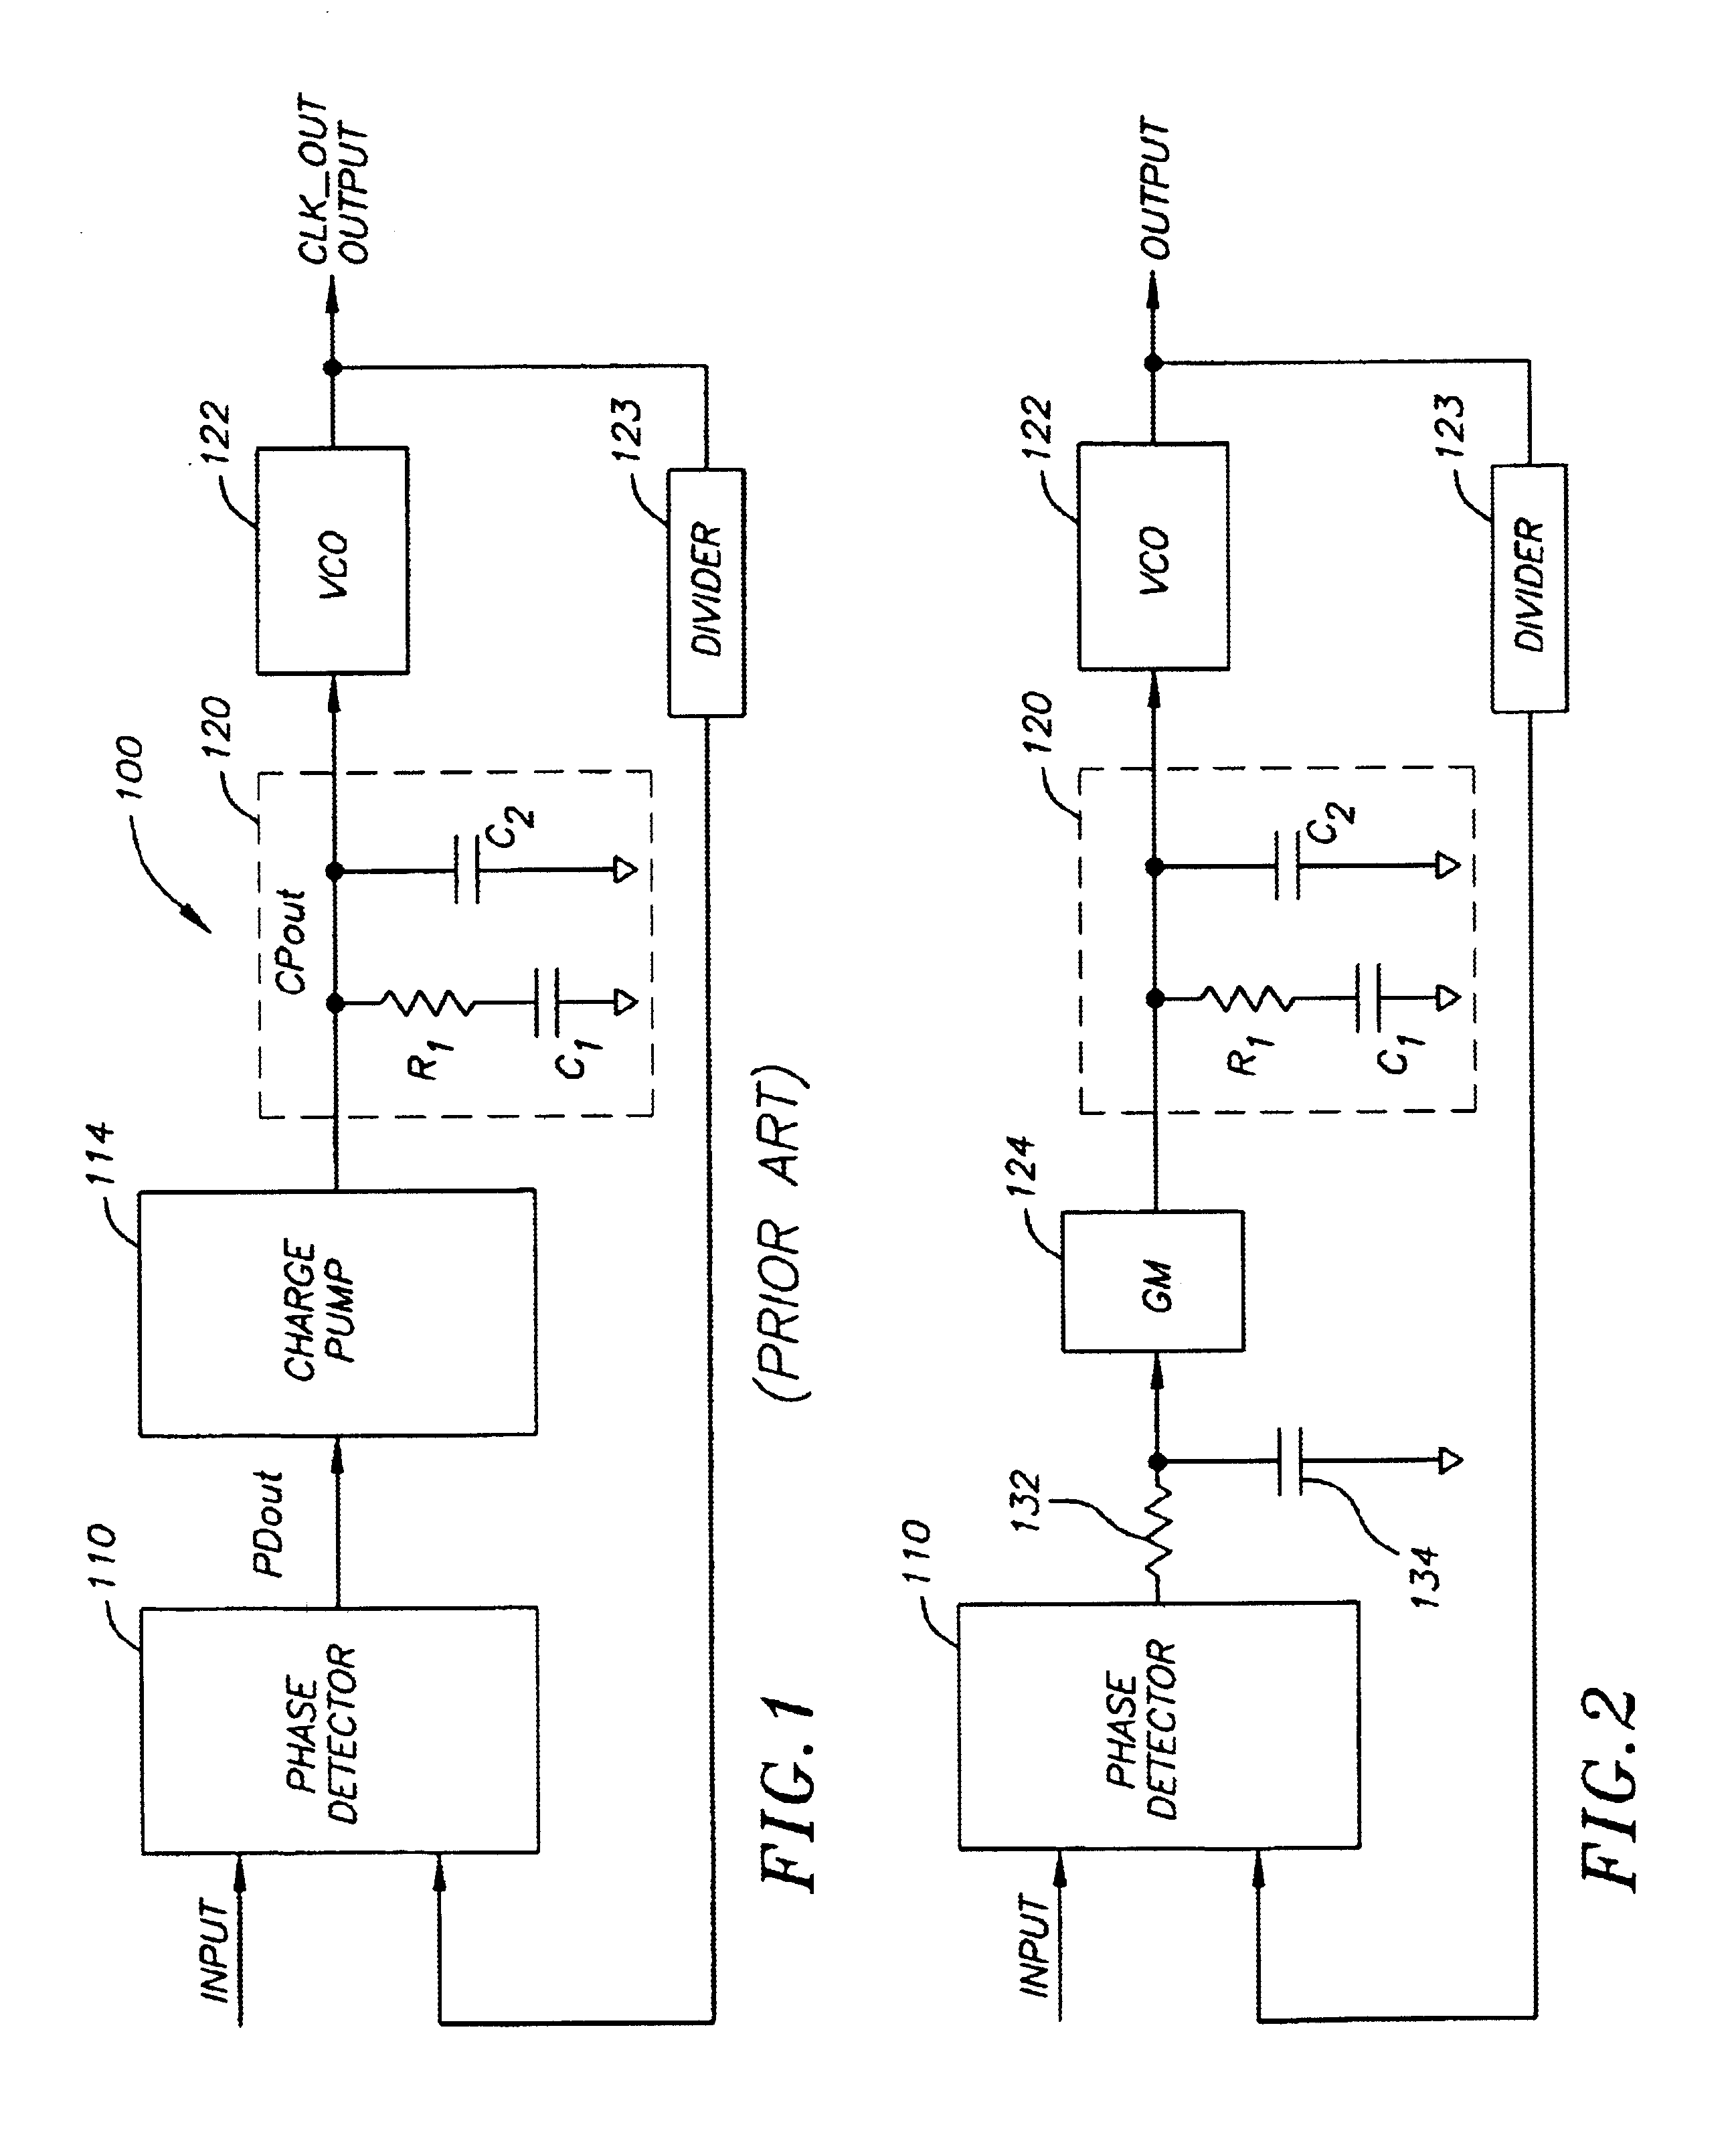 Fast acquisition phase locked loop using a current DAC